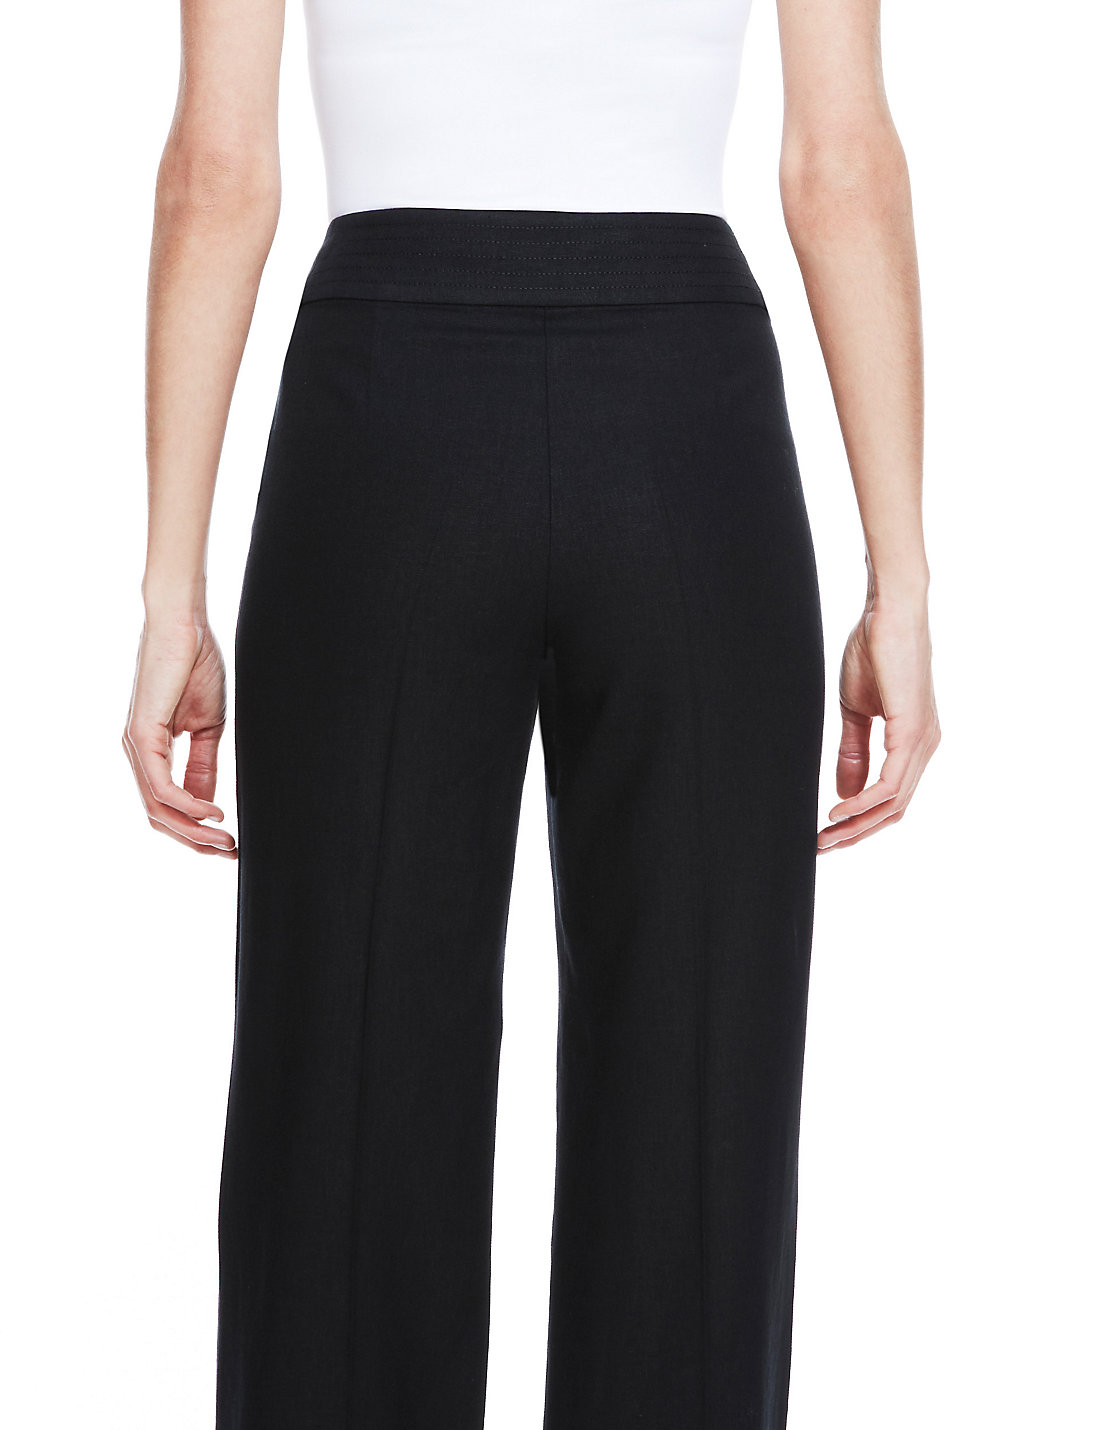 Marks and Spencer - - M&5 BLACK Linen Blend Wide Waistband Trousers ...